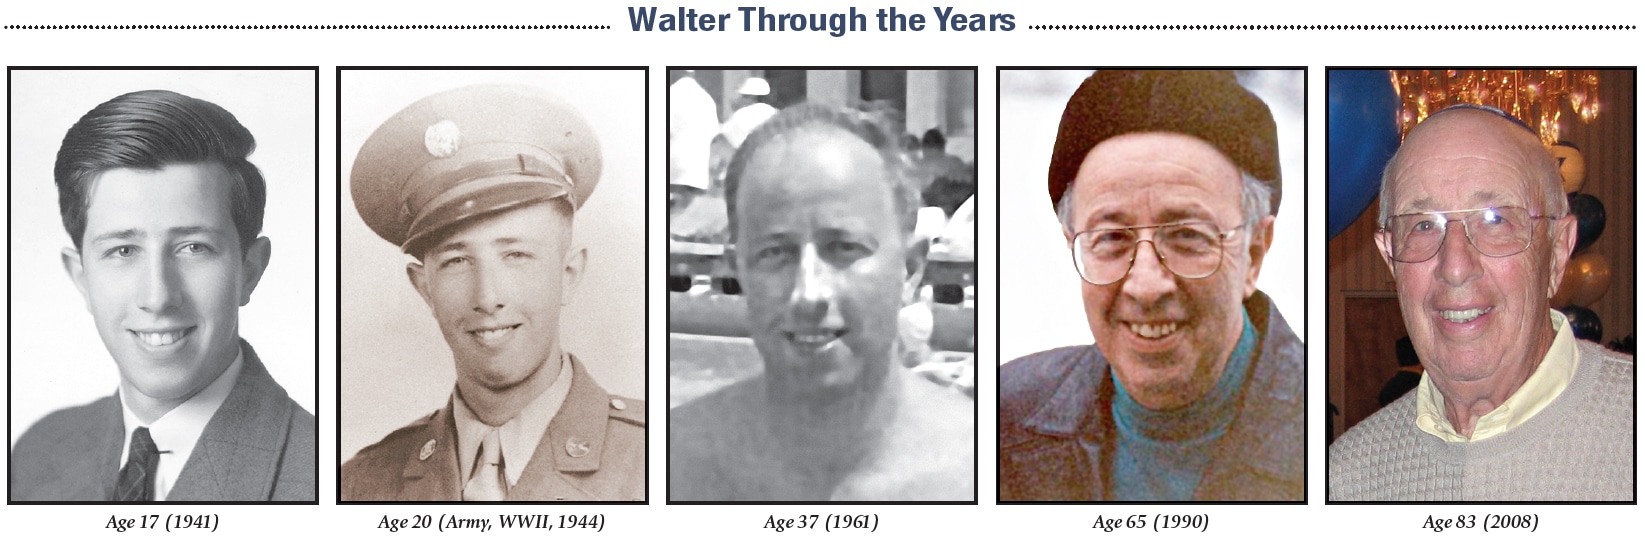 Walter-Throughout-the-Years